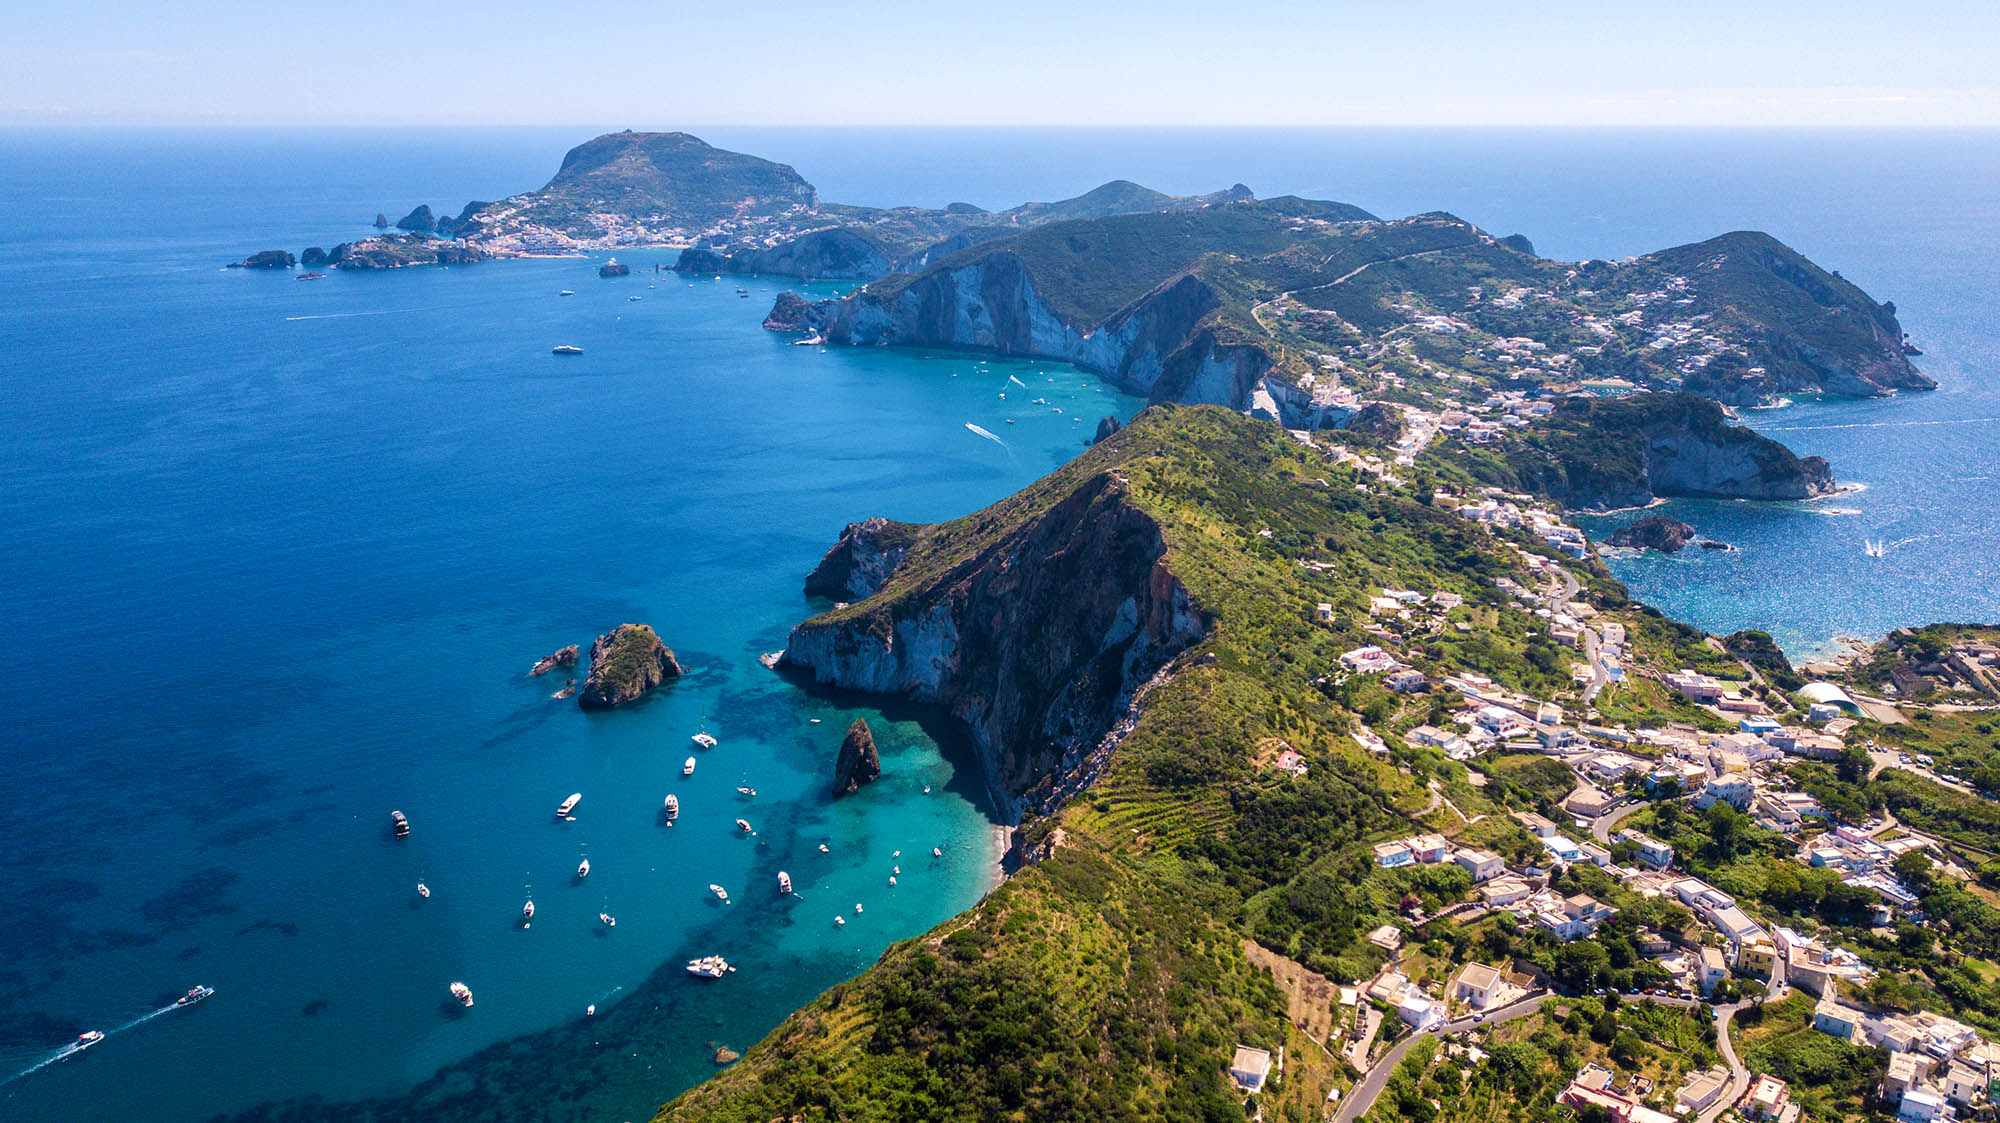 Aerial view of Ponza, island of the Italian Pontine Islands archipelago in the Tyrrhenian Sea, Italy. On the island there are few houses between the Mediterranean vegetation and the sea.